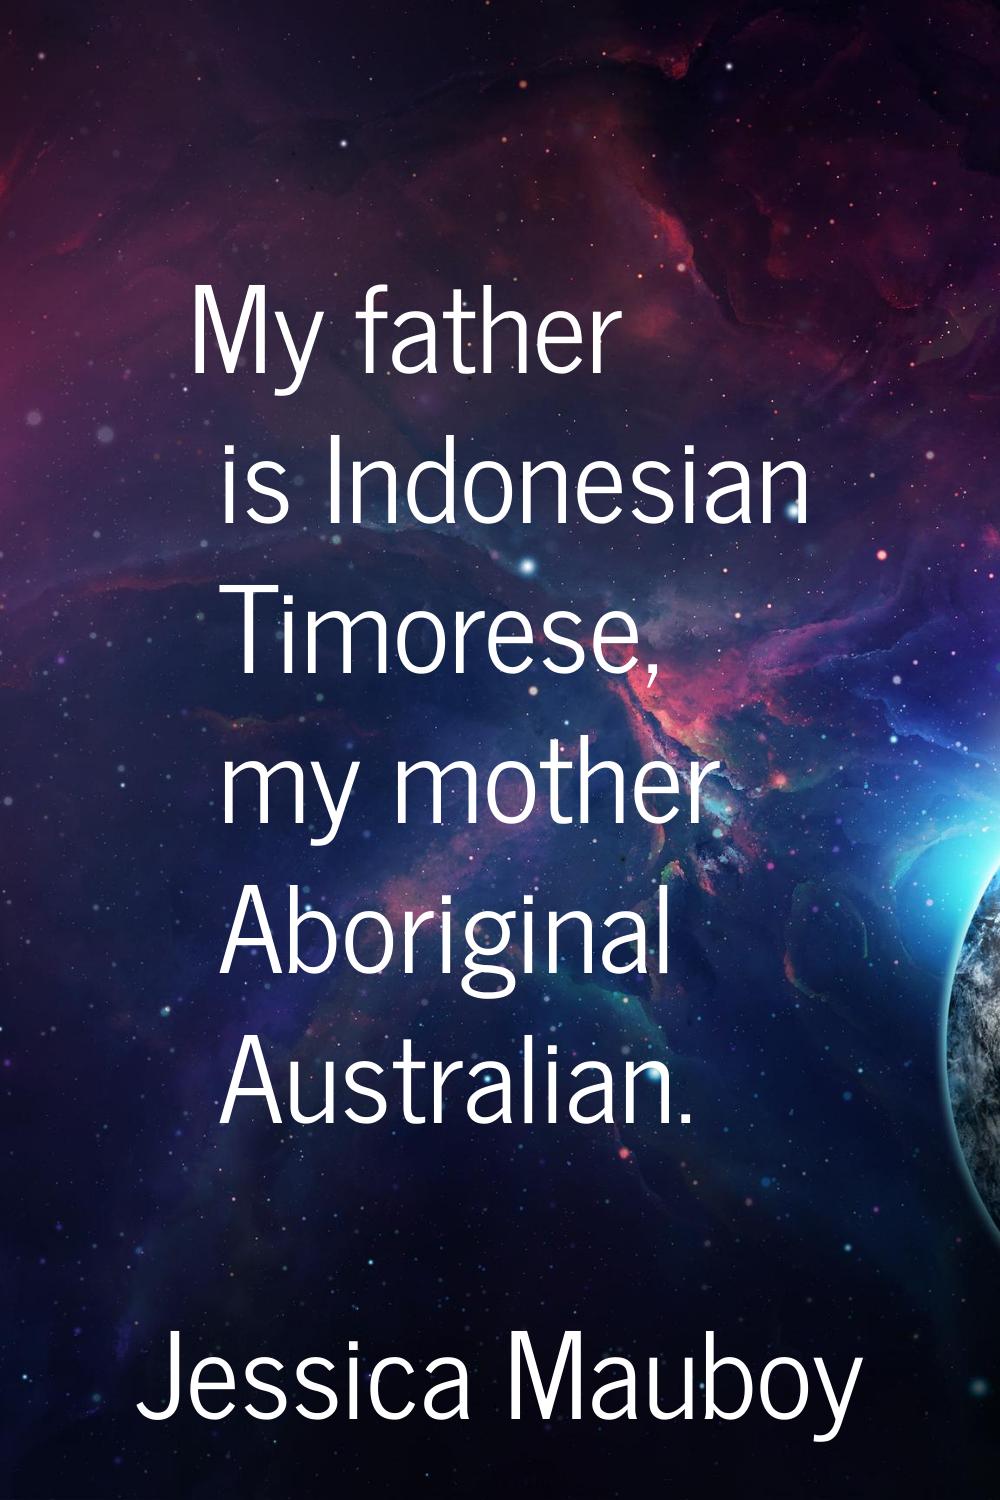 My father is Indonesian Timorese, my mother Aboriginal Australian.